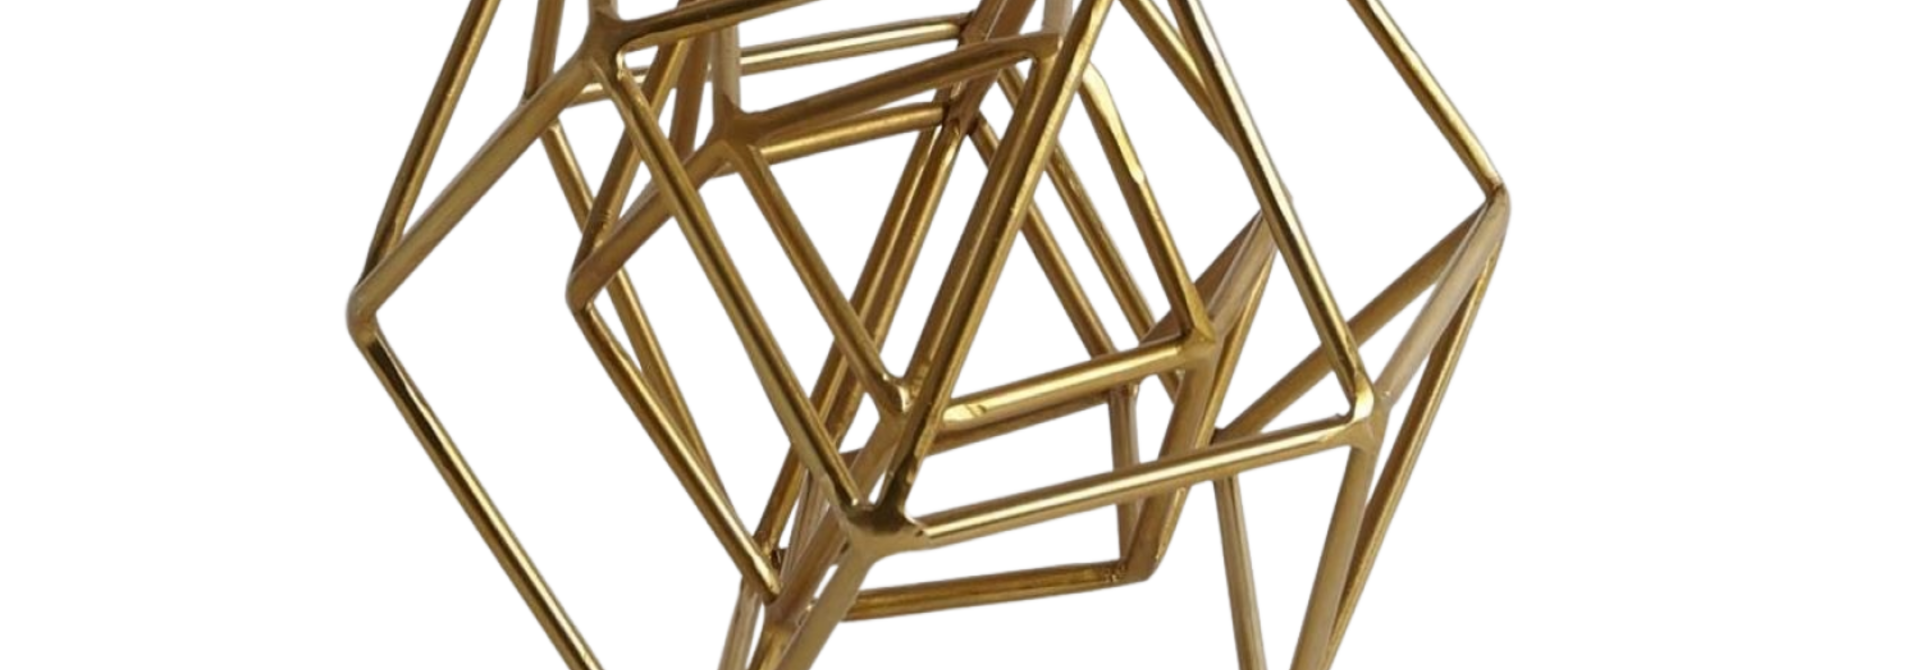 Geo Sculpture | The Accessory Collection, Gold - 9.5 Inch x 9.5Inch x 7.75 Inch